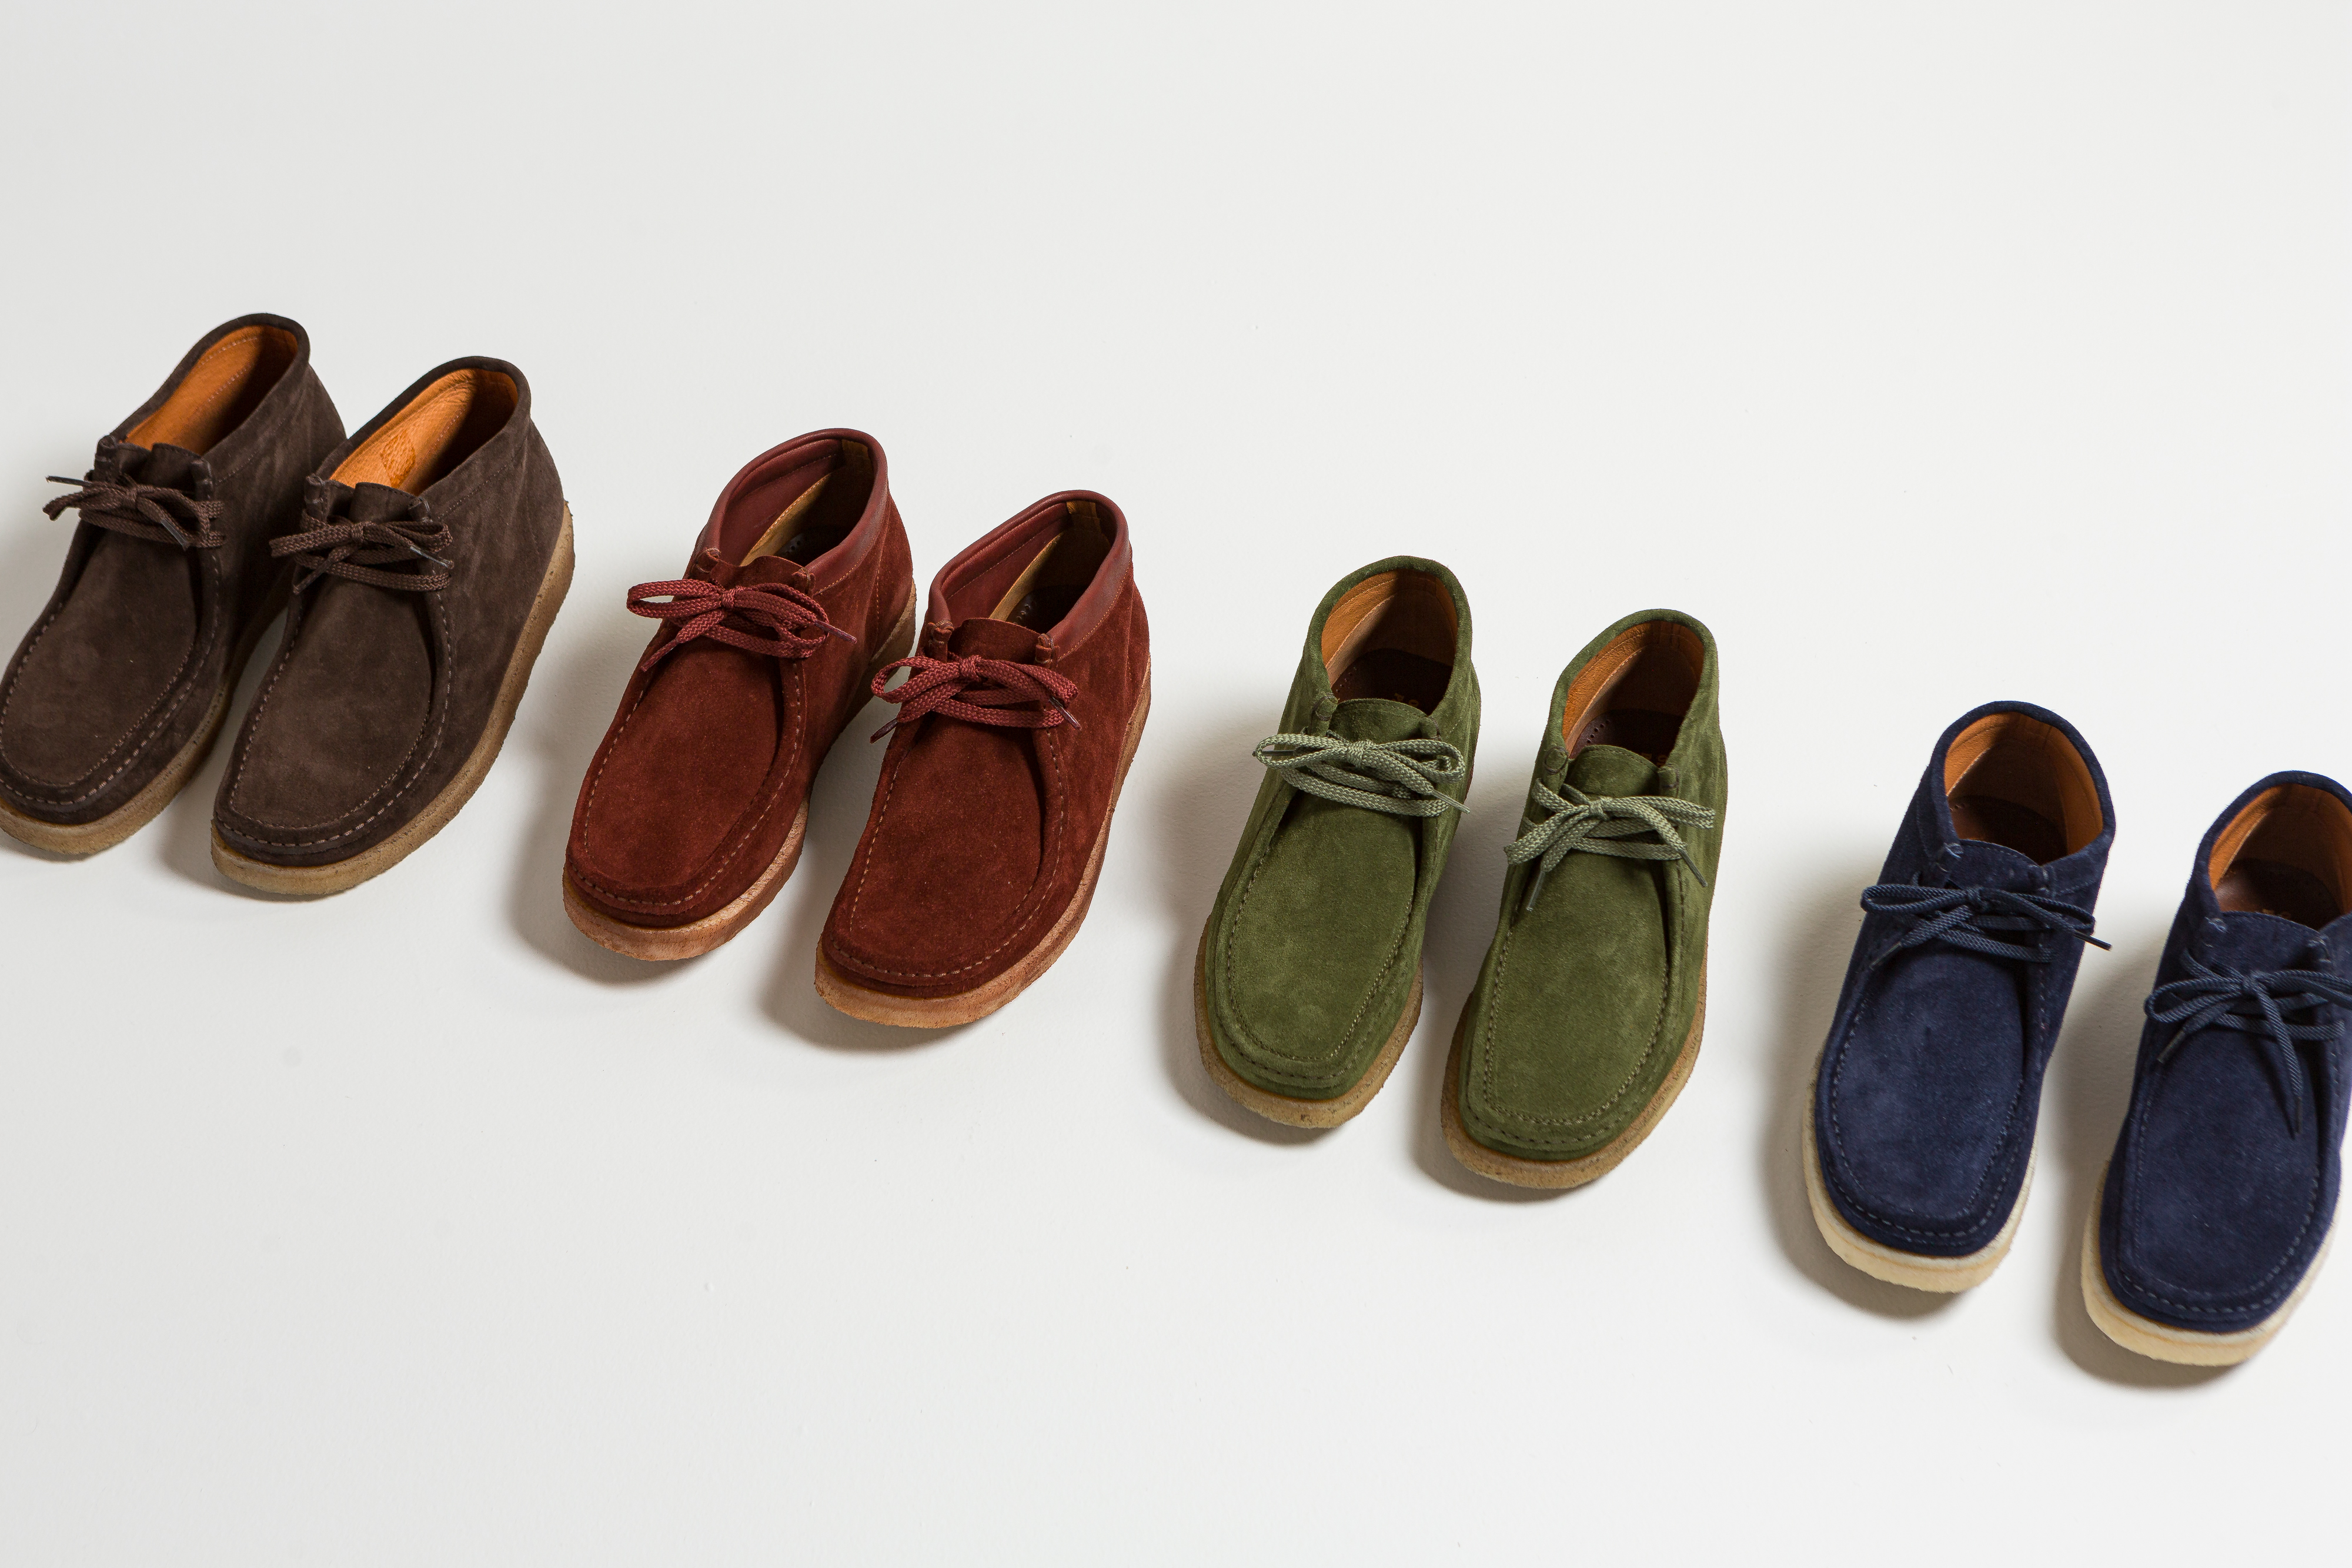 Up There Store - Introducing Padmore & Barnes The Original Wallabee Boot